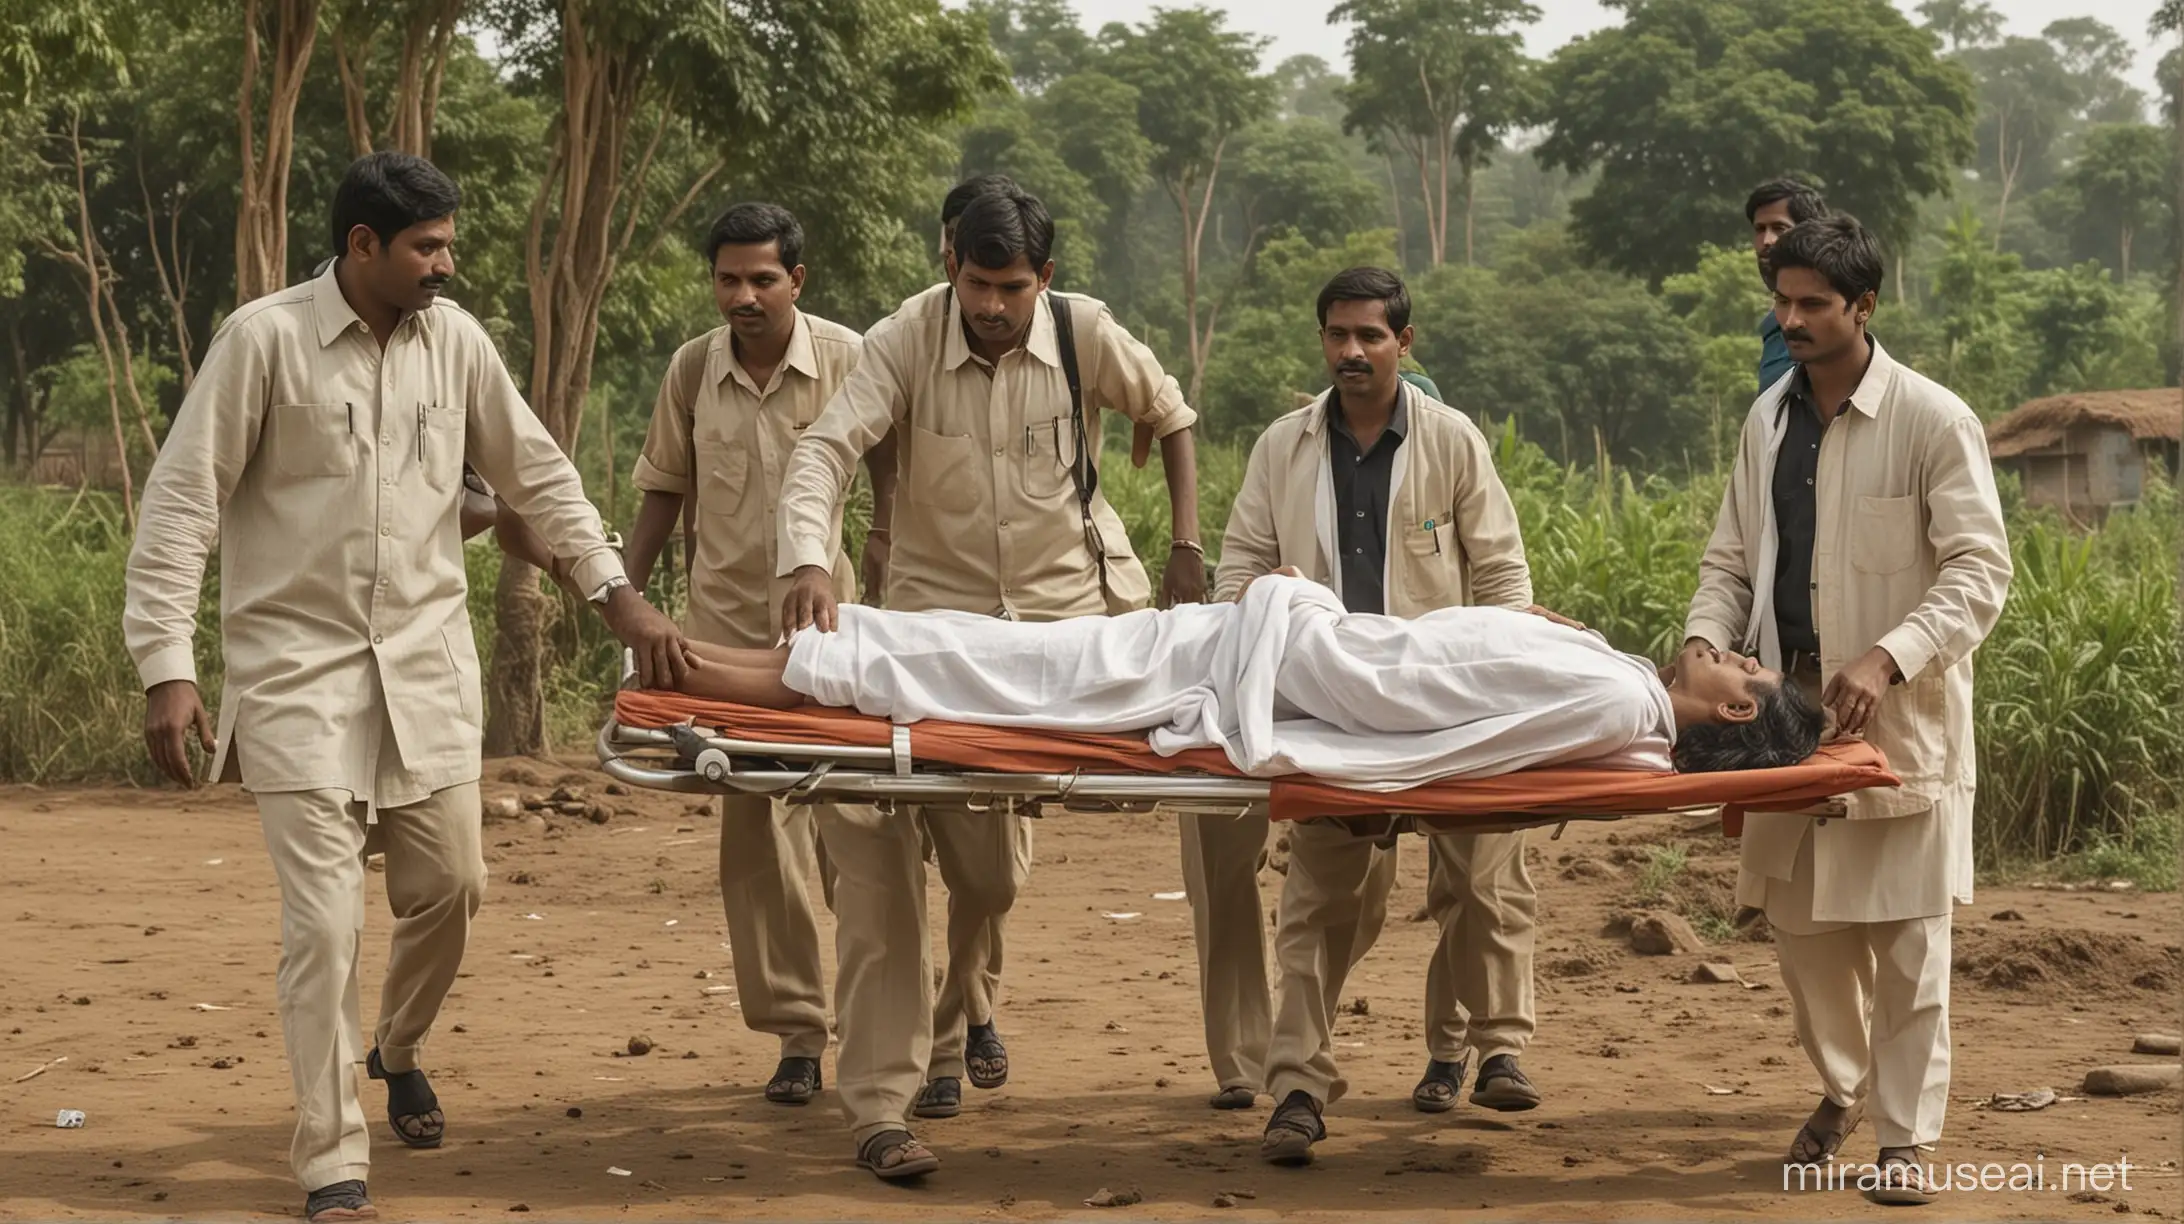 Indian People Carrying Patient on Stretcher with Polling Background